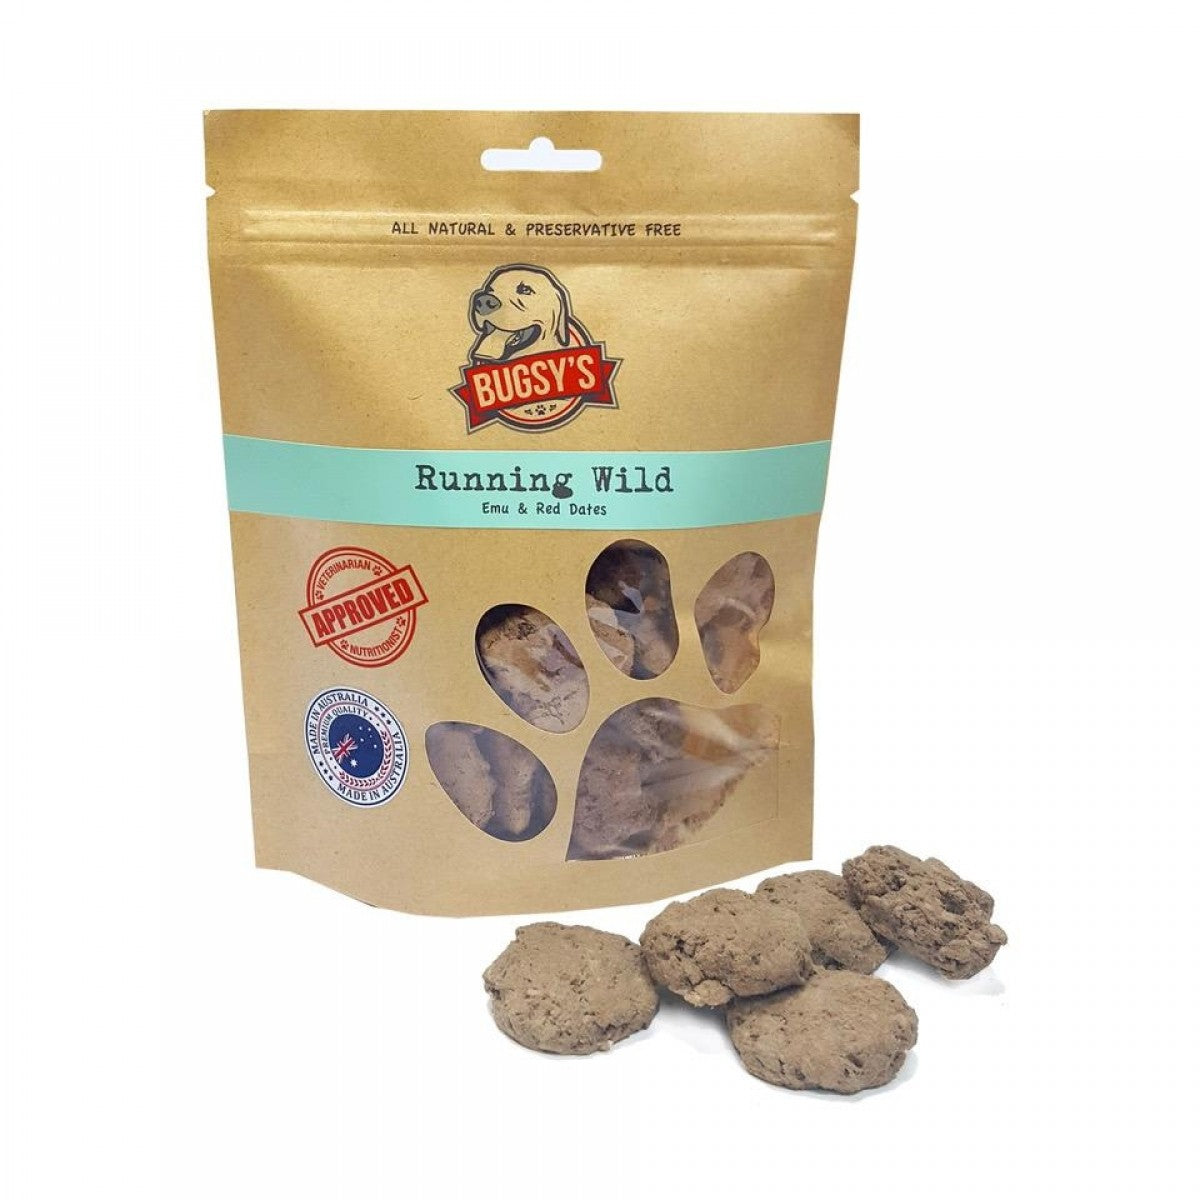 Bugsy's Dog Treats - Running Wild: Emu and Red Dates 70g